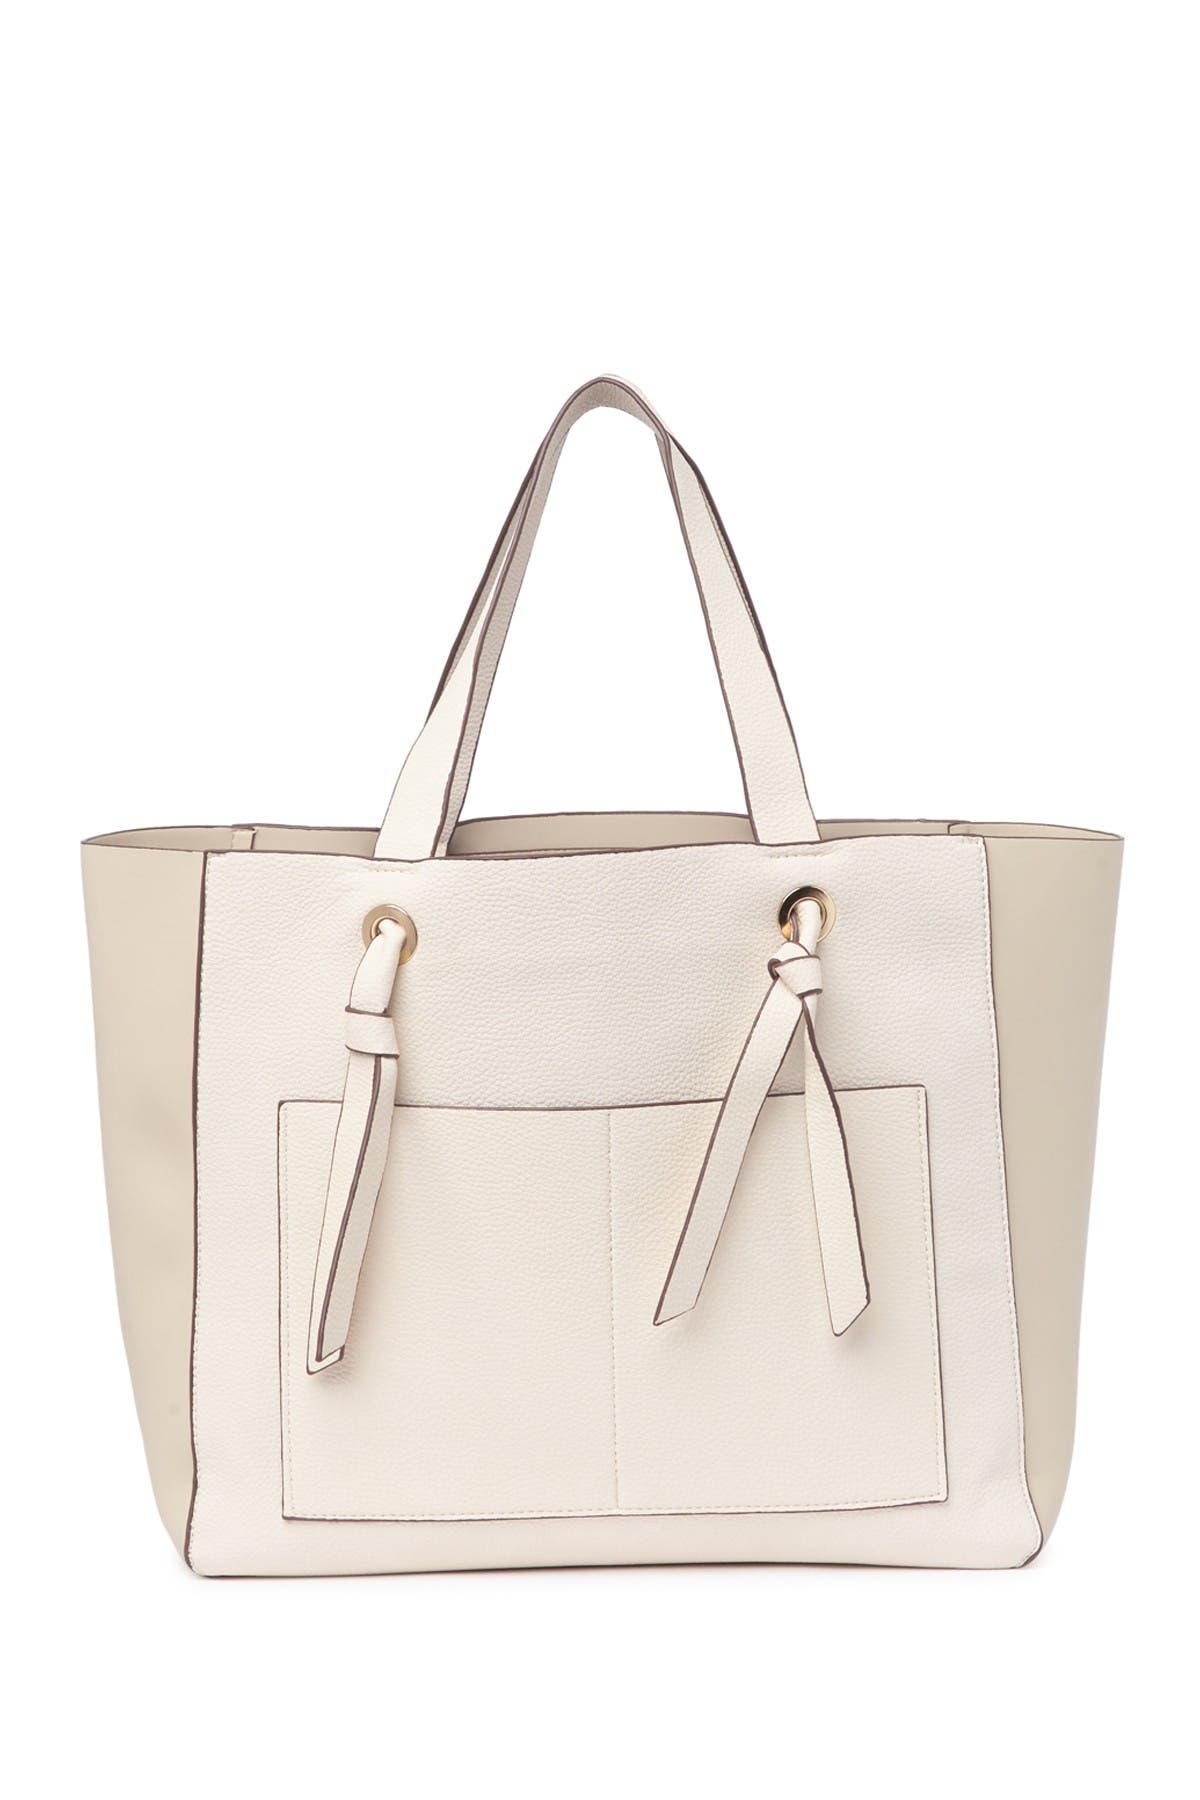 Melrose And Market Sofia Tote In Light Beige